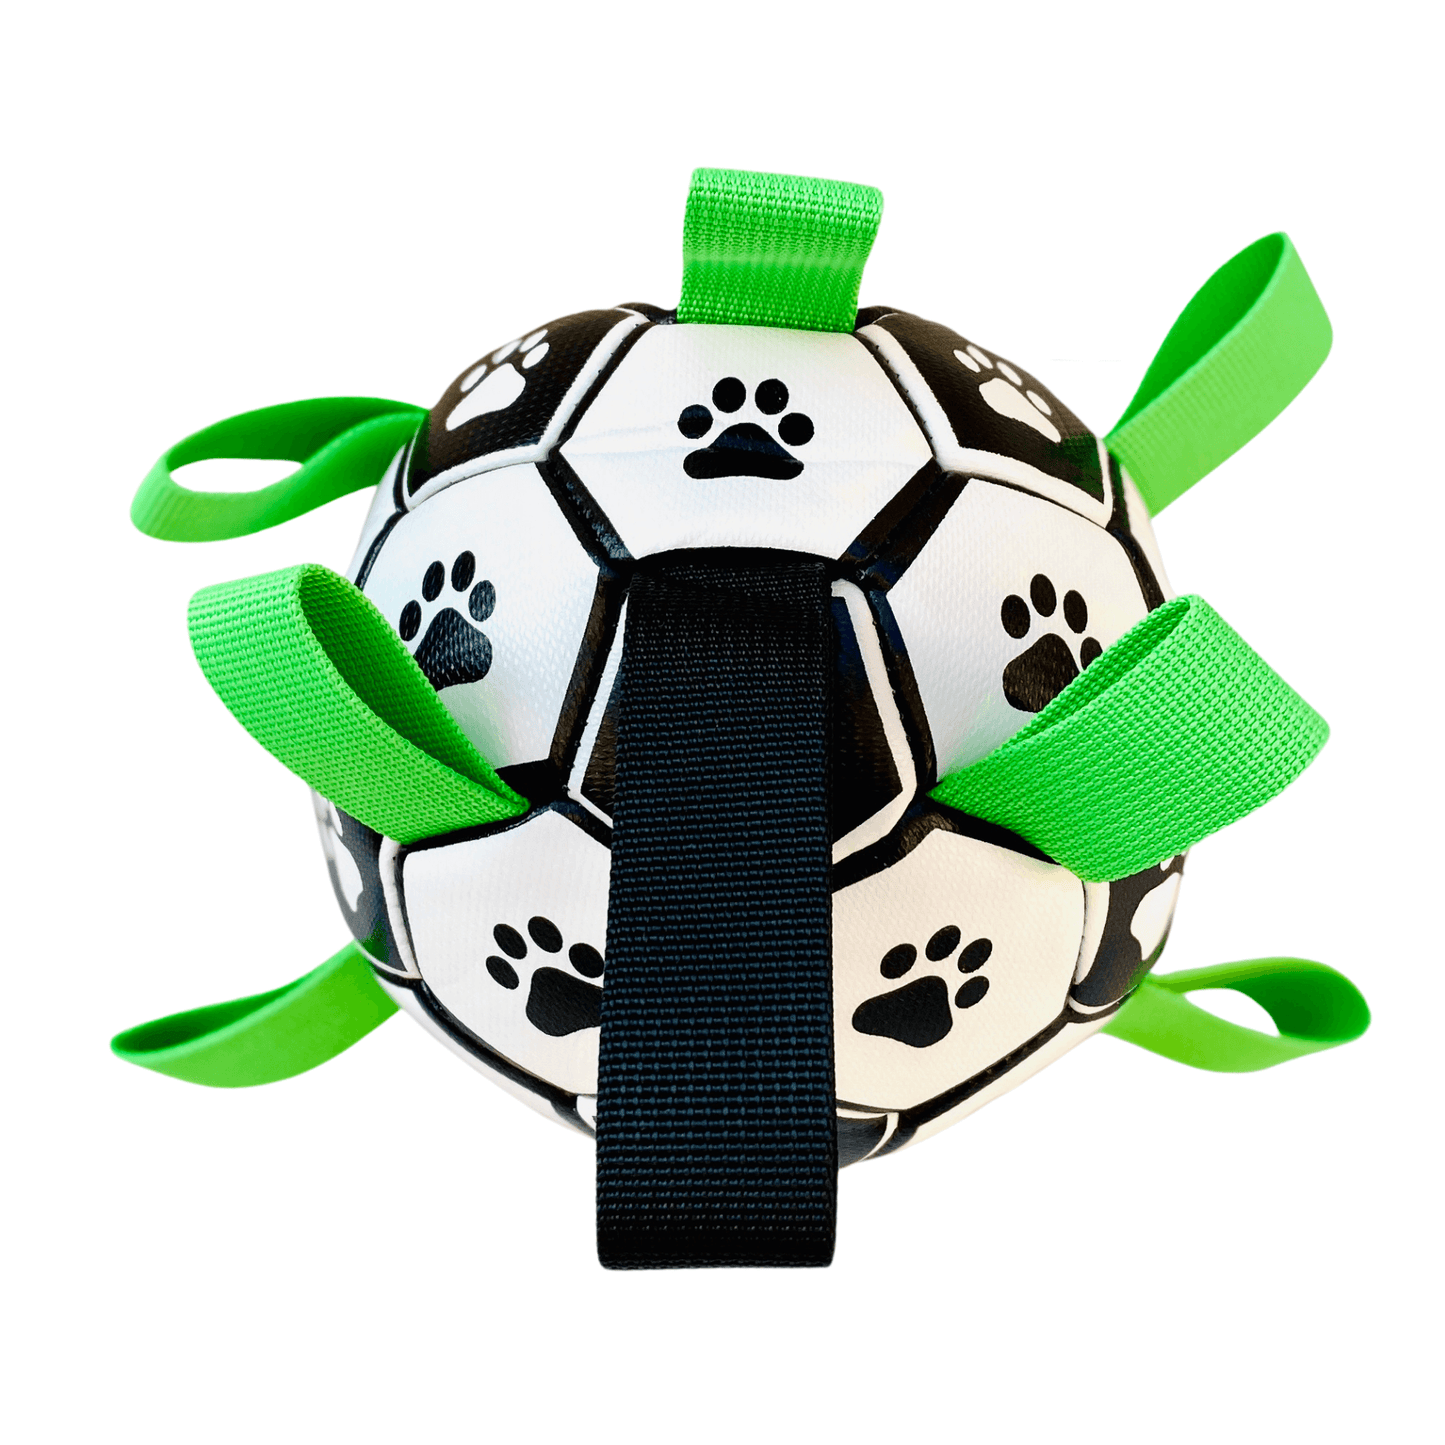 Let's Pawty Interactive dog soccer ball